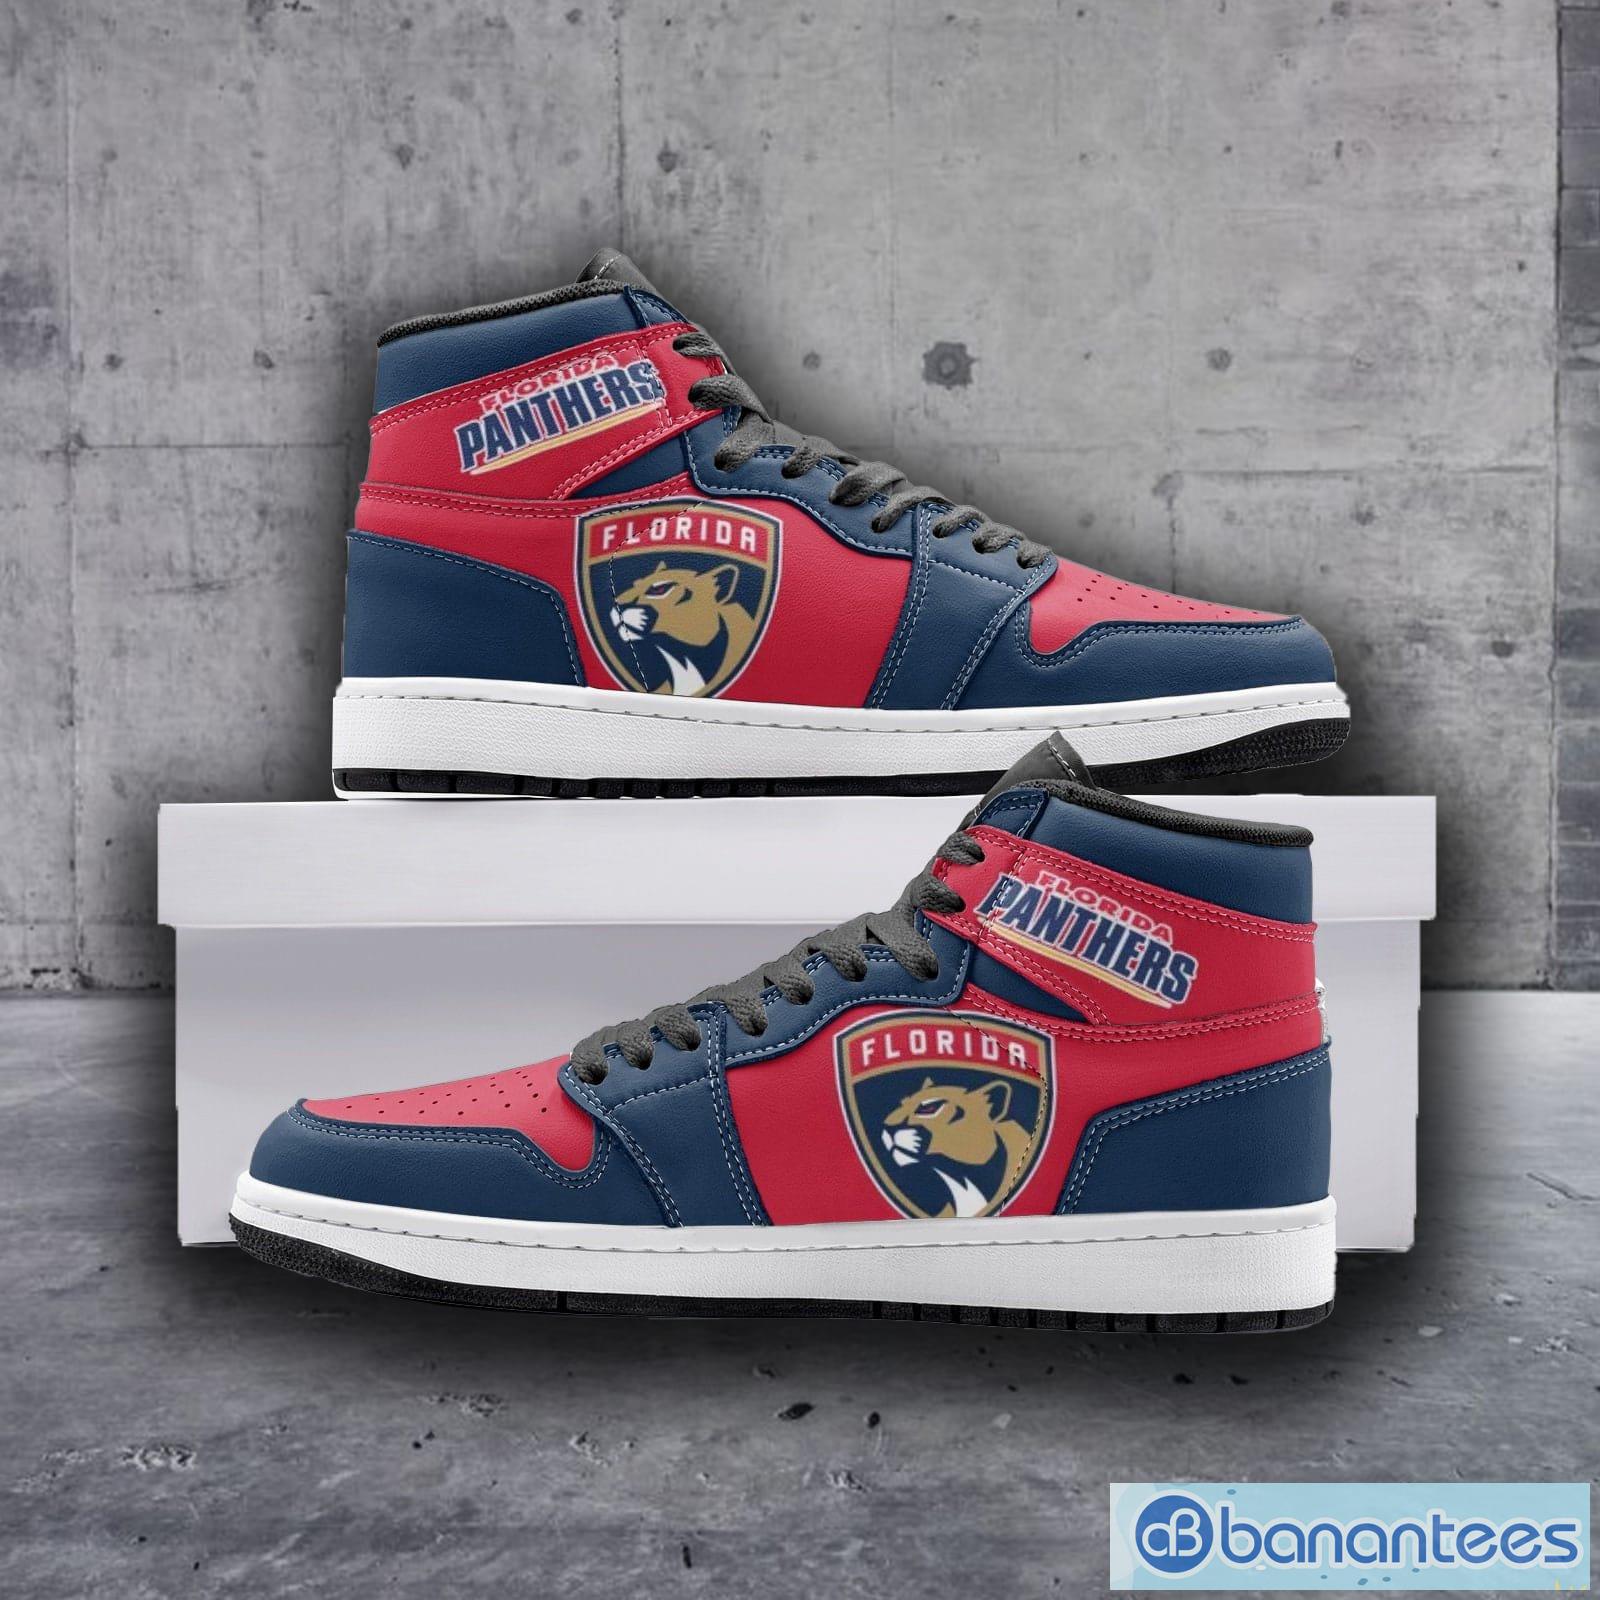 Florida Panther x Supreme Custom Edition Shoes - BTF Store